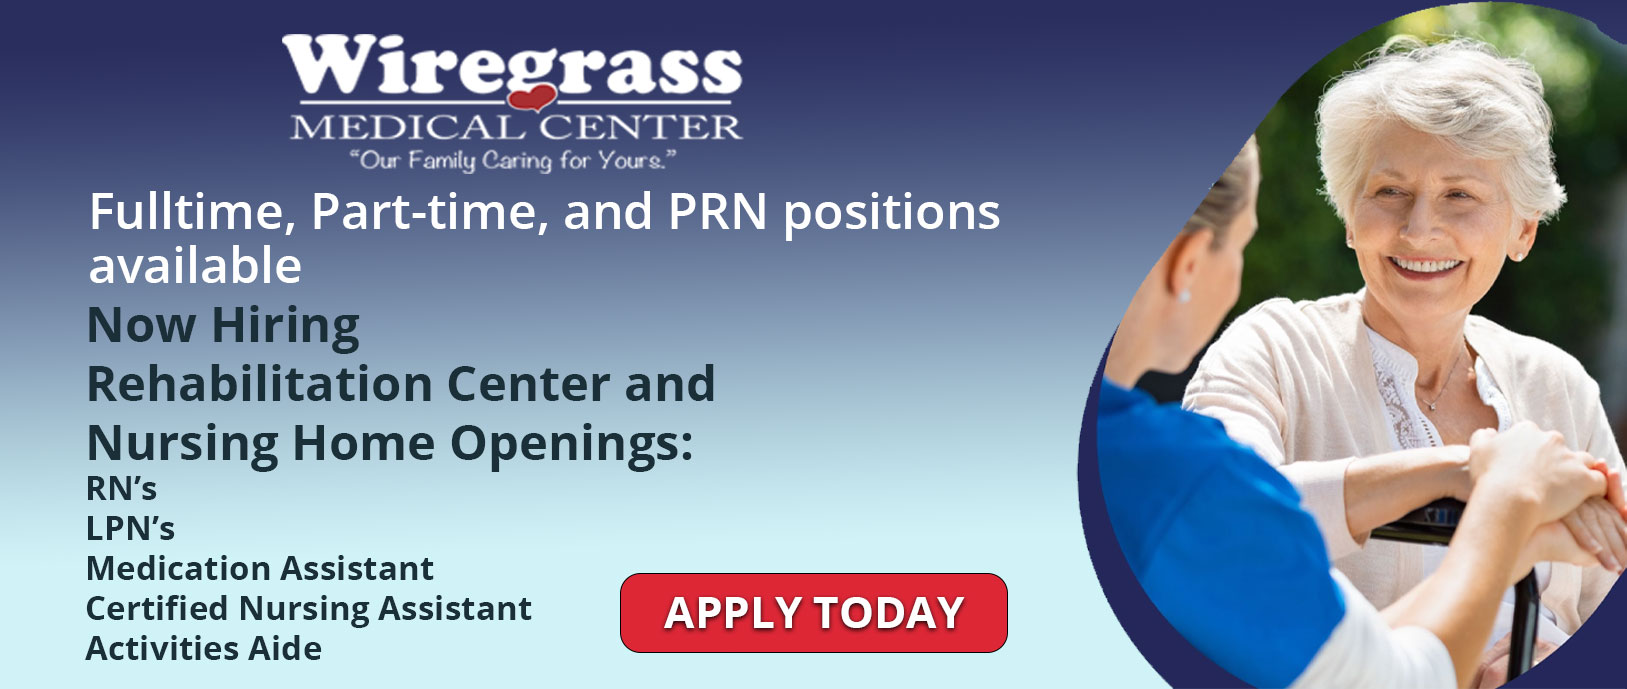 Fulltime, Part-Time, and PRN positions available 
Now Hiring
Rehabilitation Center and Nursing Home Openings:

RN's
LPN's
Medication Assistant
Certified Nursing Assistant
Activities Aide

(APPLY TODAY)